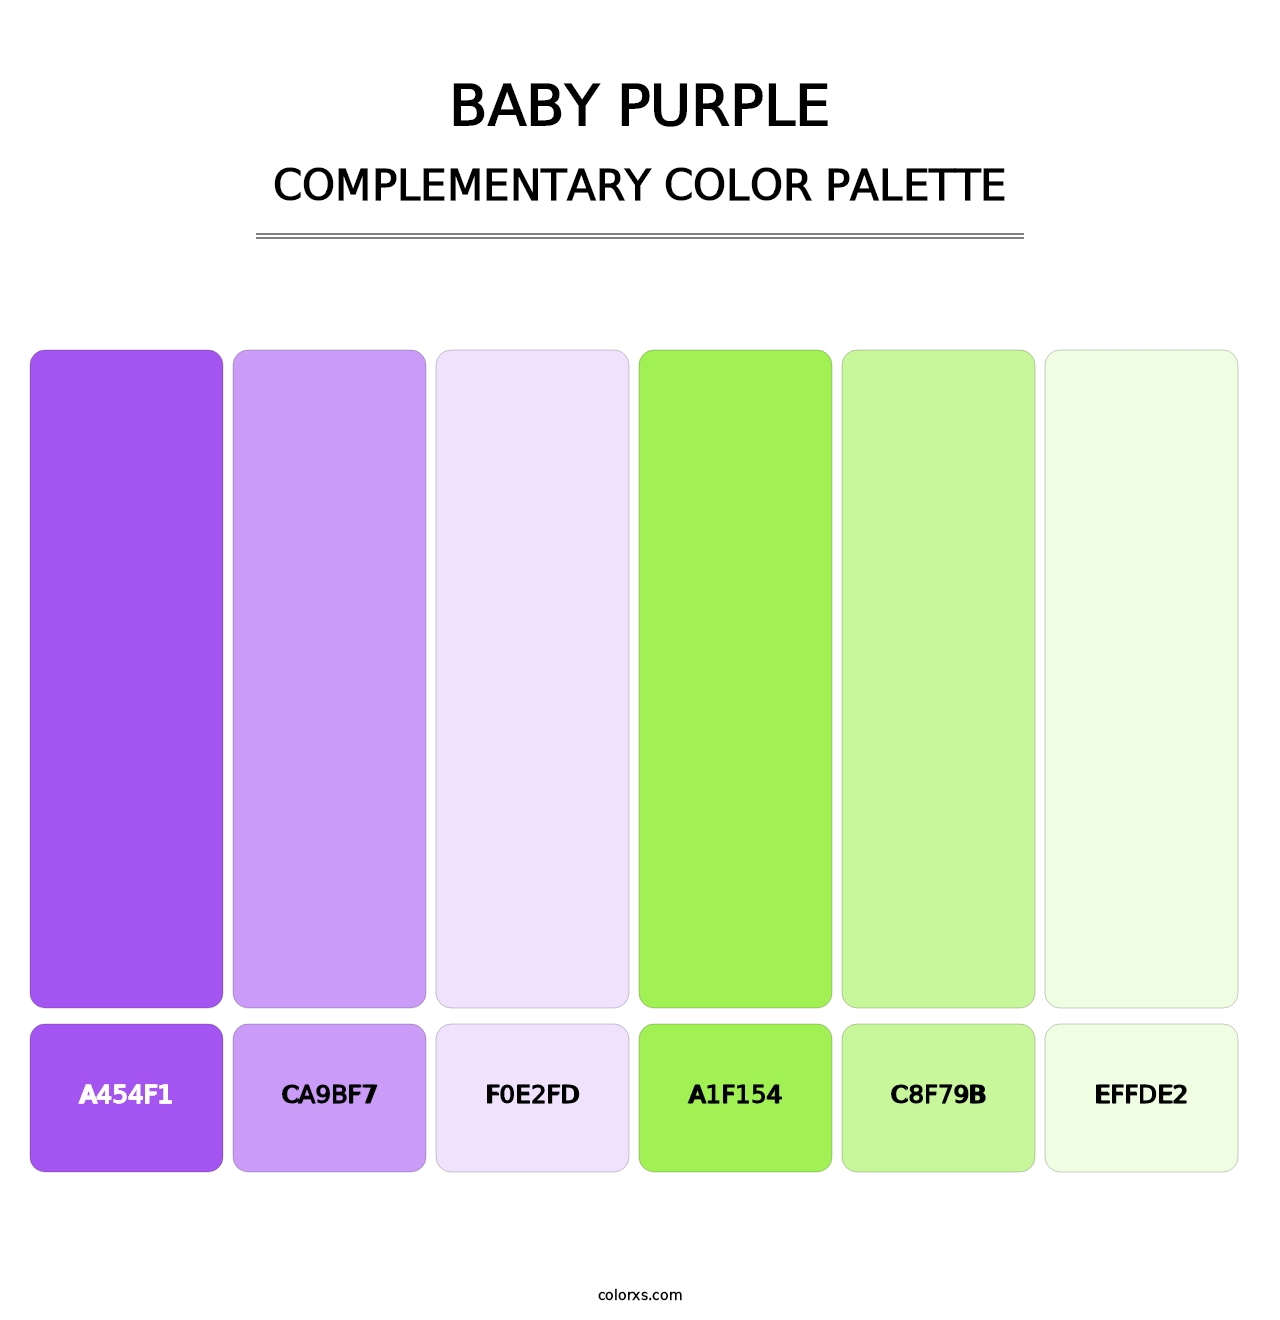 Baby Purple - Complementary Color Palette